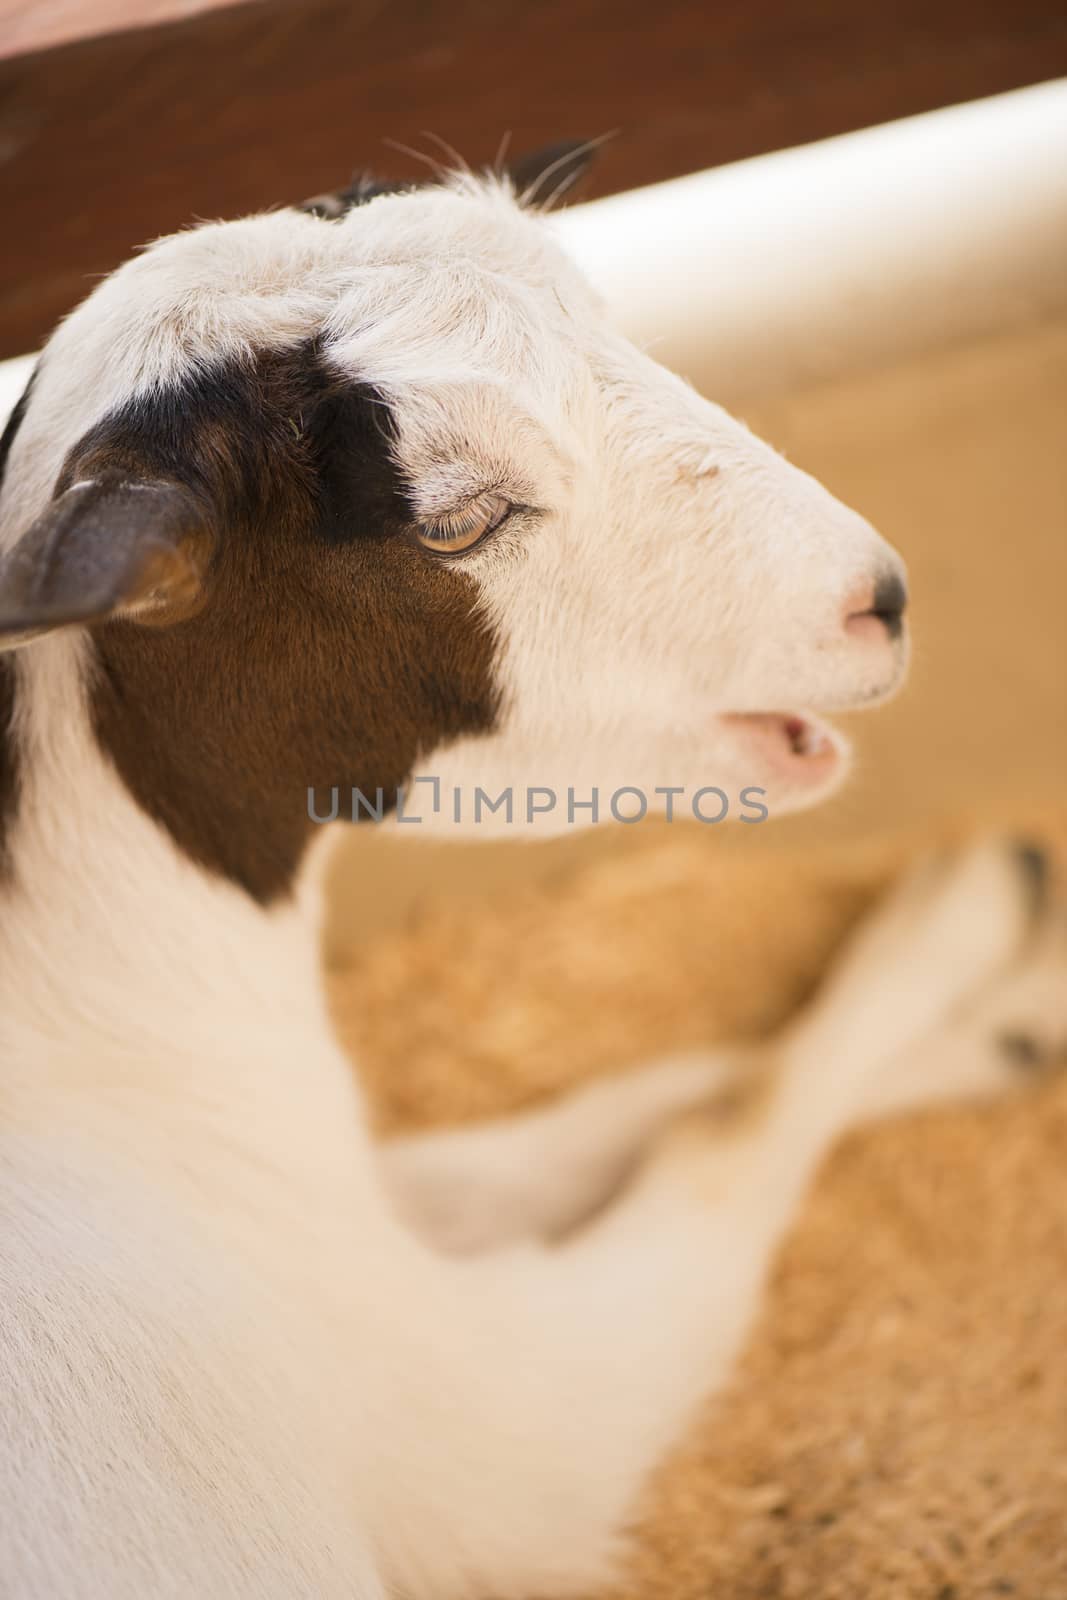 Goat by itself inside the farm shed resting during the day.